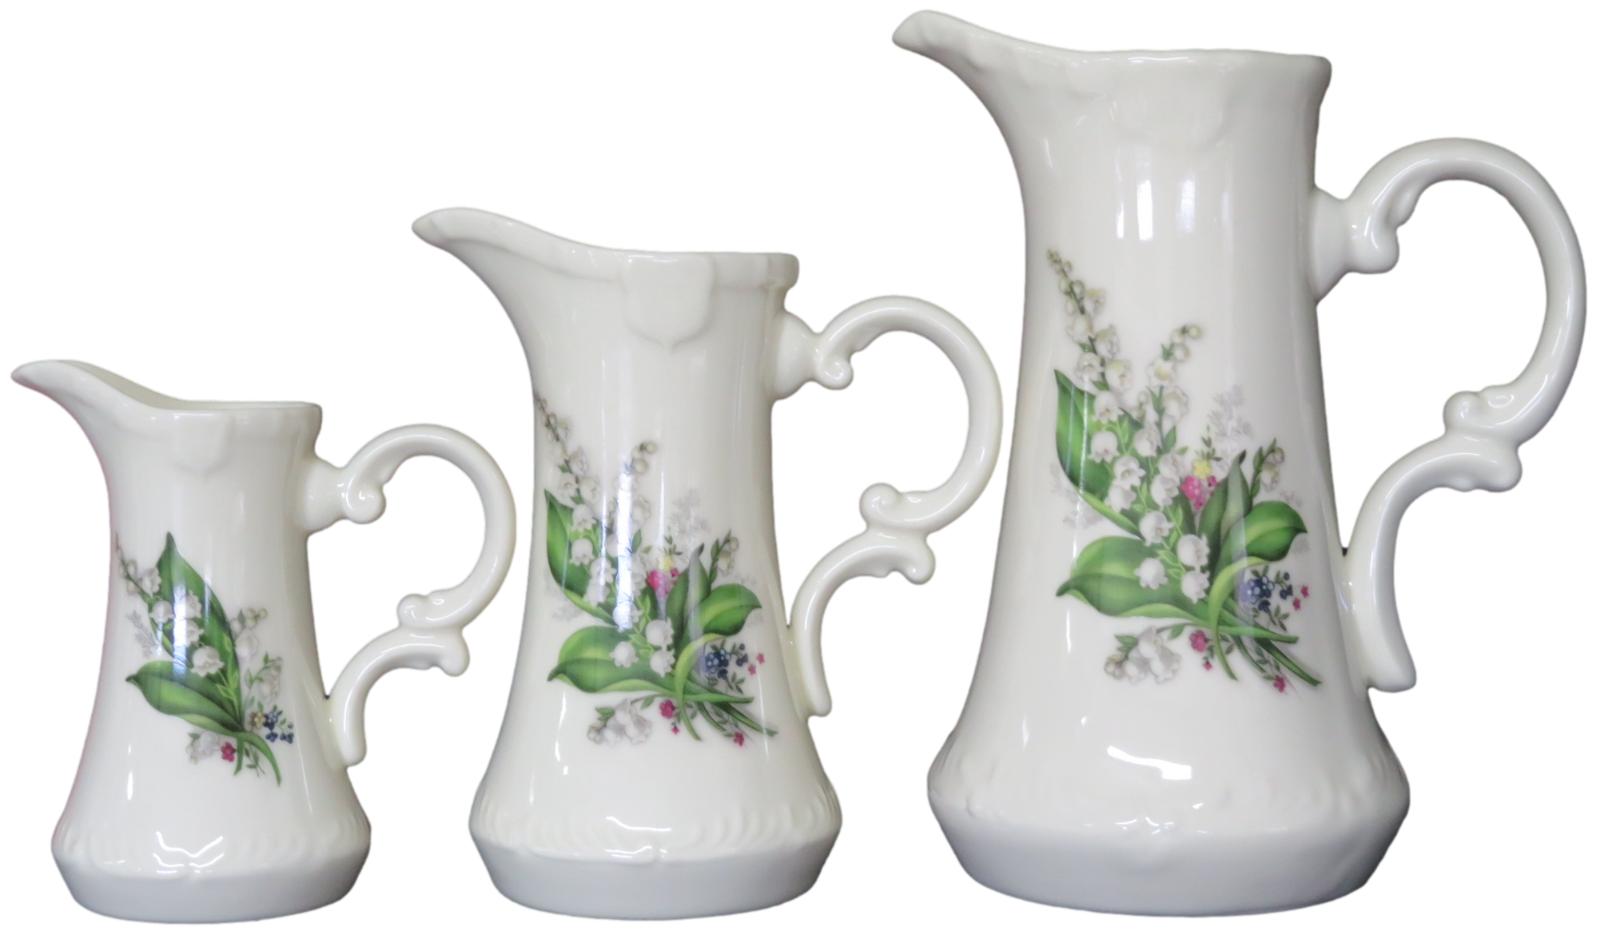 Ceramic Jug Pitcher Lilly Of Valley Floral Vintage Style Choice of 3 Sizes New